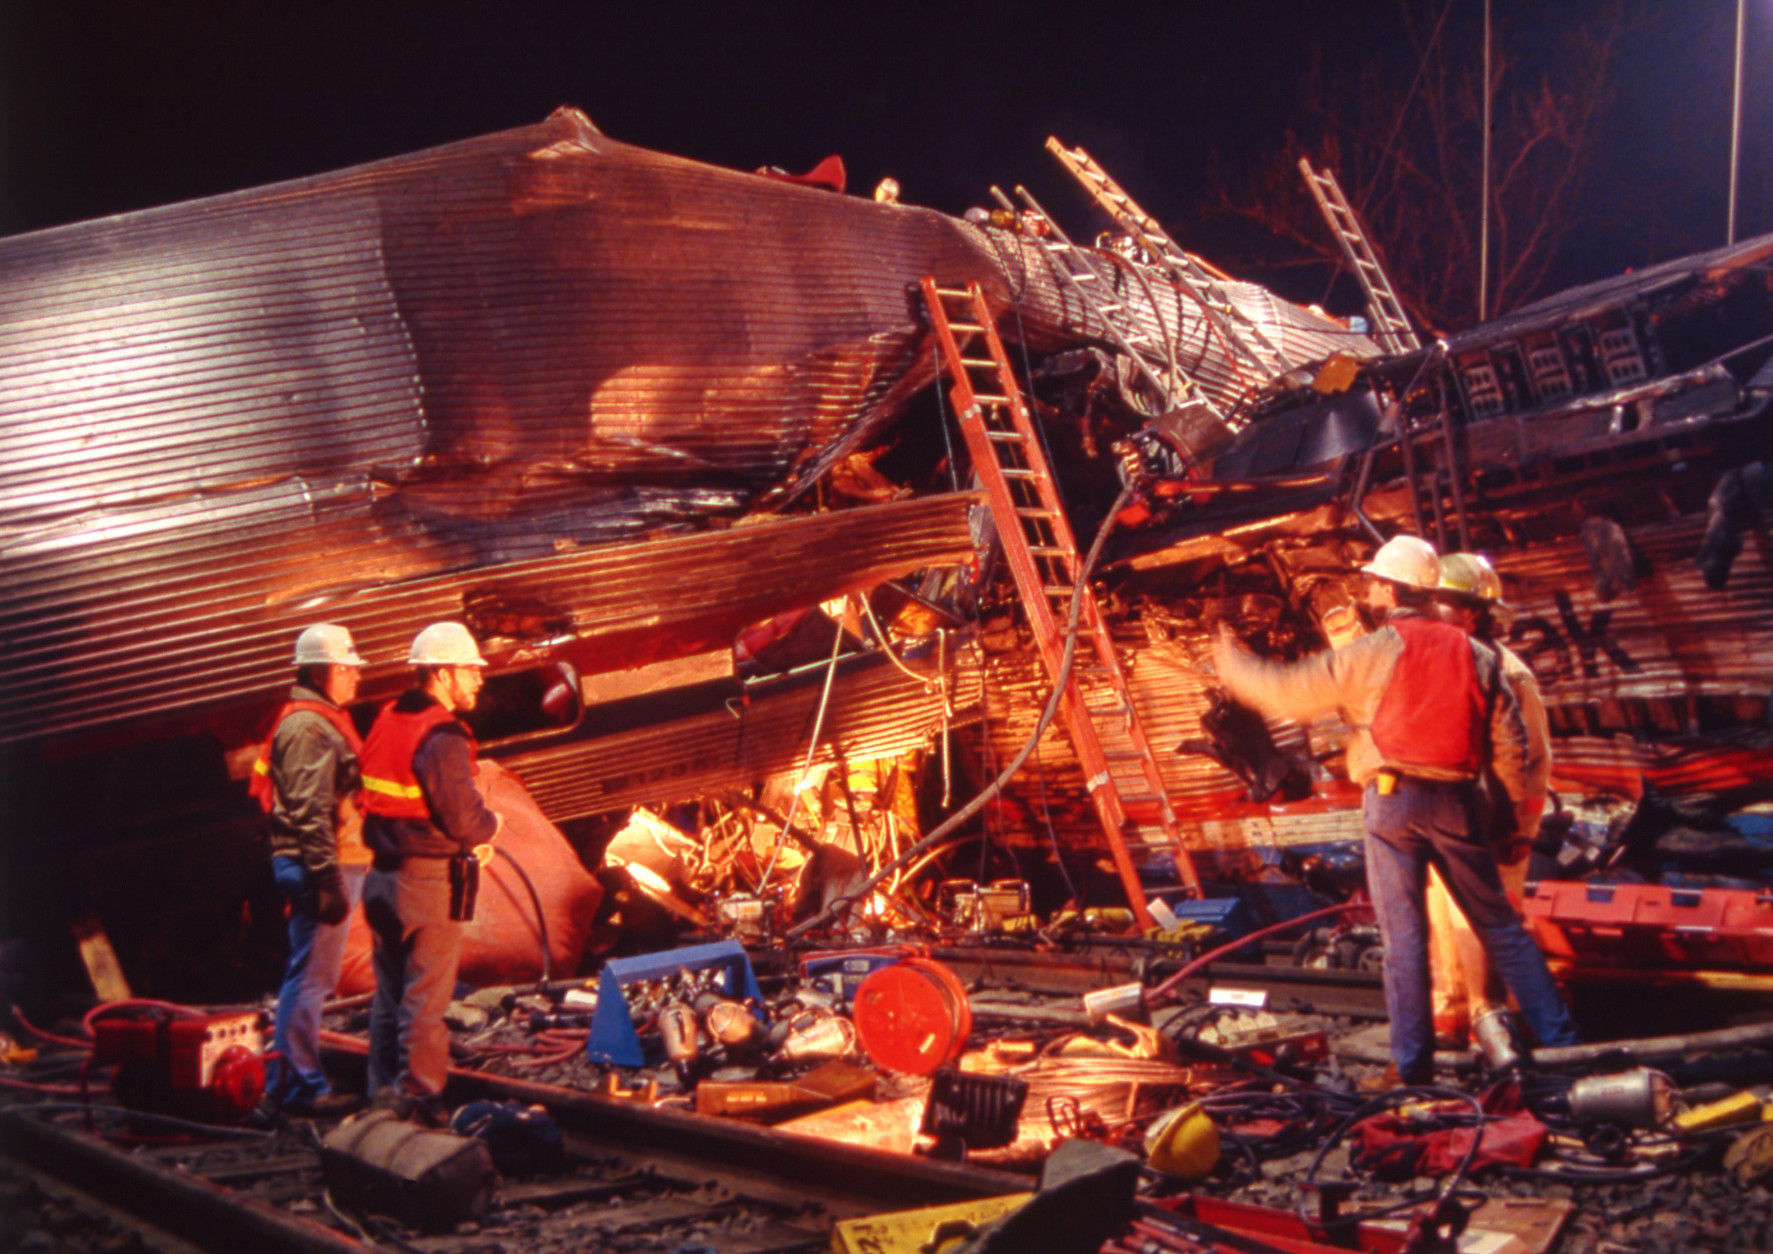 Workmen survey the damage from the collision between an Amtrak passenger train and three Conrail diesel engines, in Chase Md., on Jan 4, 1987. Fifteen people were killed and more than 170 injured in the collision. (AP Photo/Applewhite)